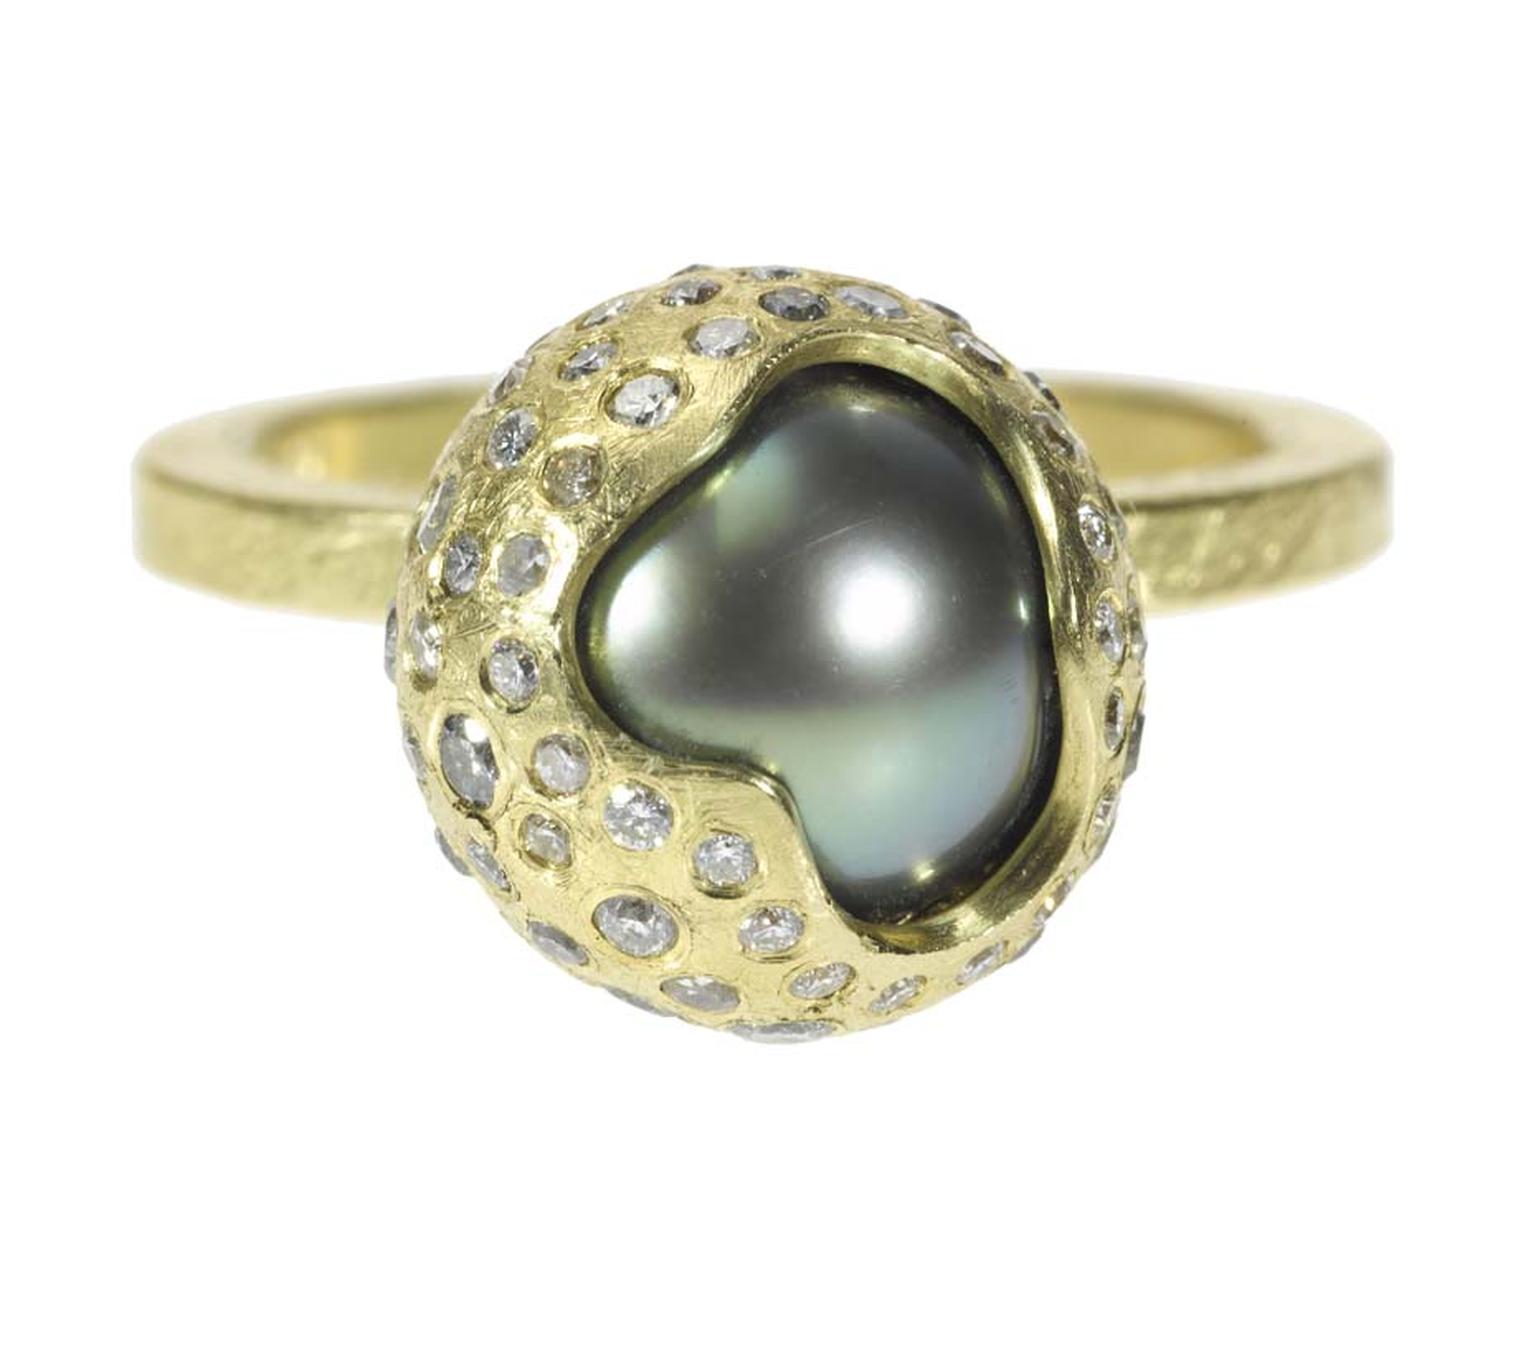 Todd Reed's new pearl collection featuring Tahitian pearl orbs which peek out of diamond-encrusted, textured metal casings.